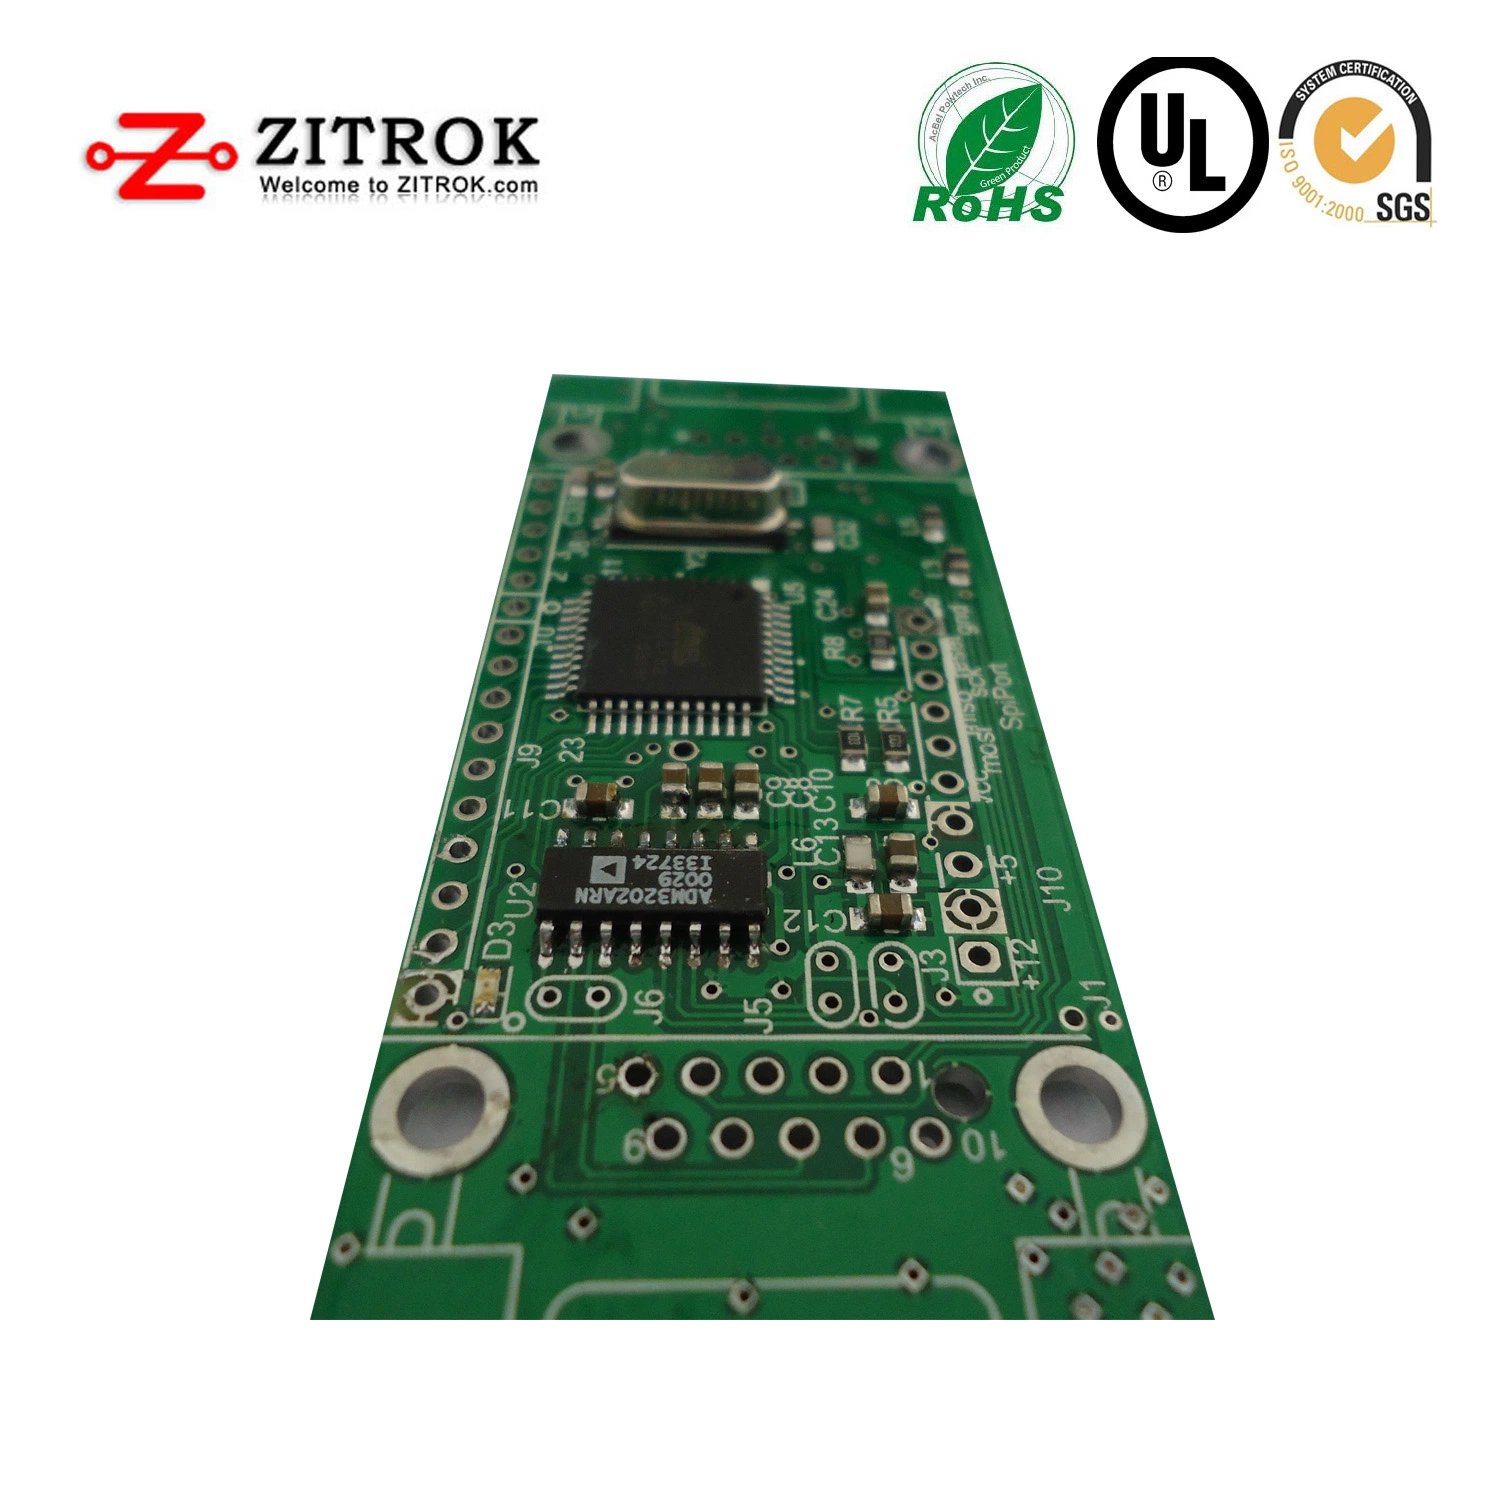 EMS Electronic PCBA, Medical Devices PCB Assembly